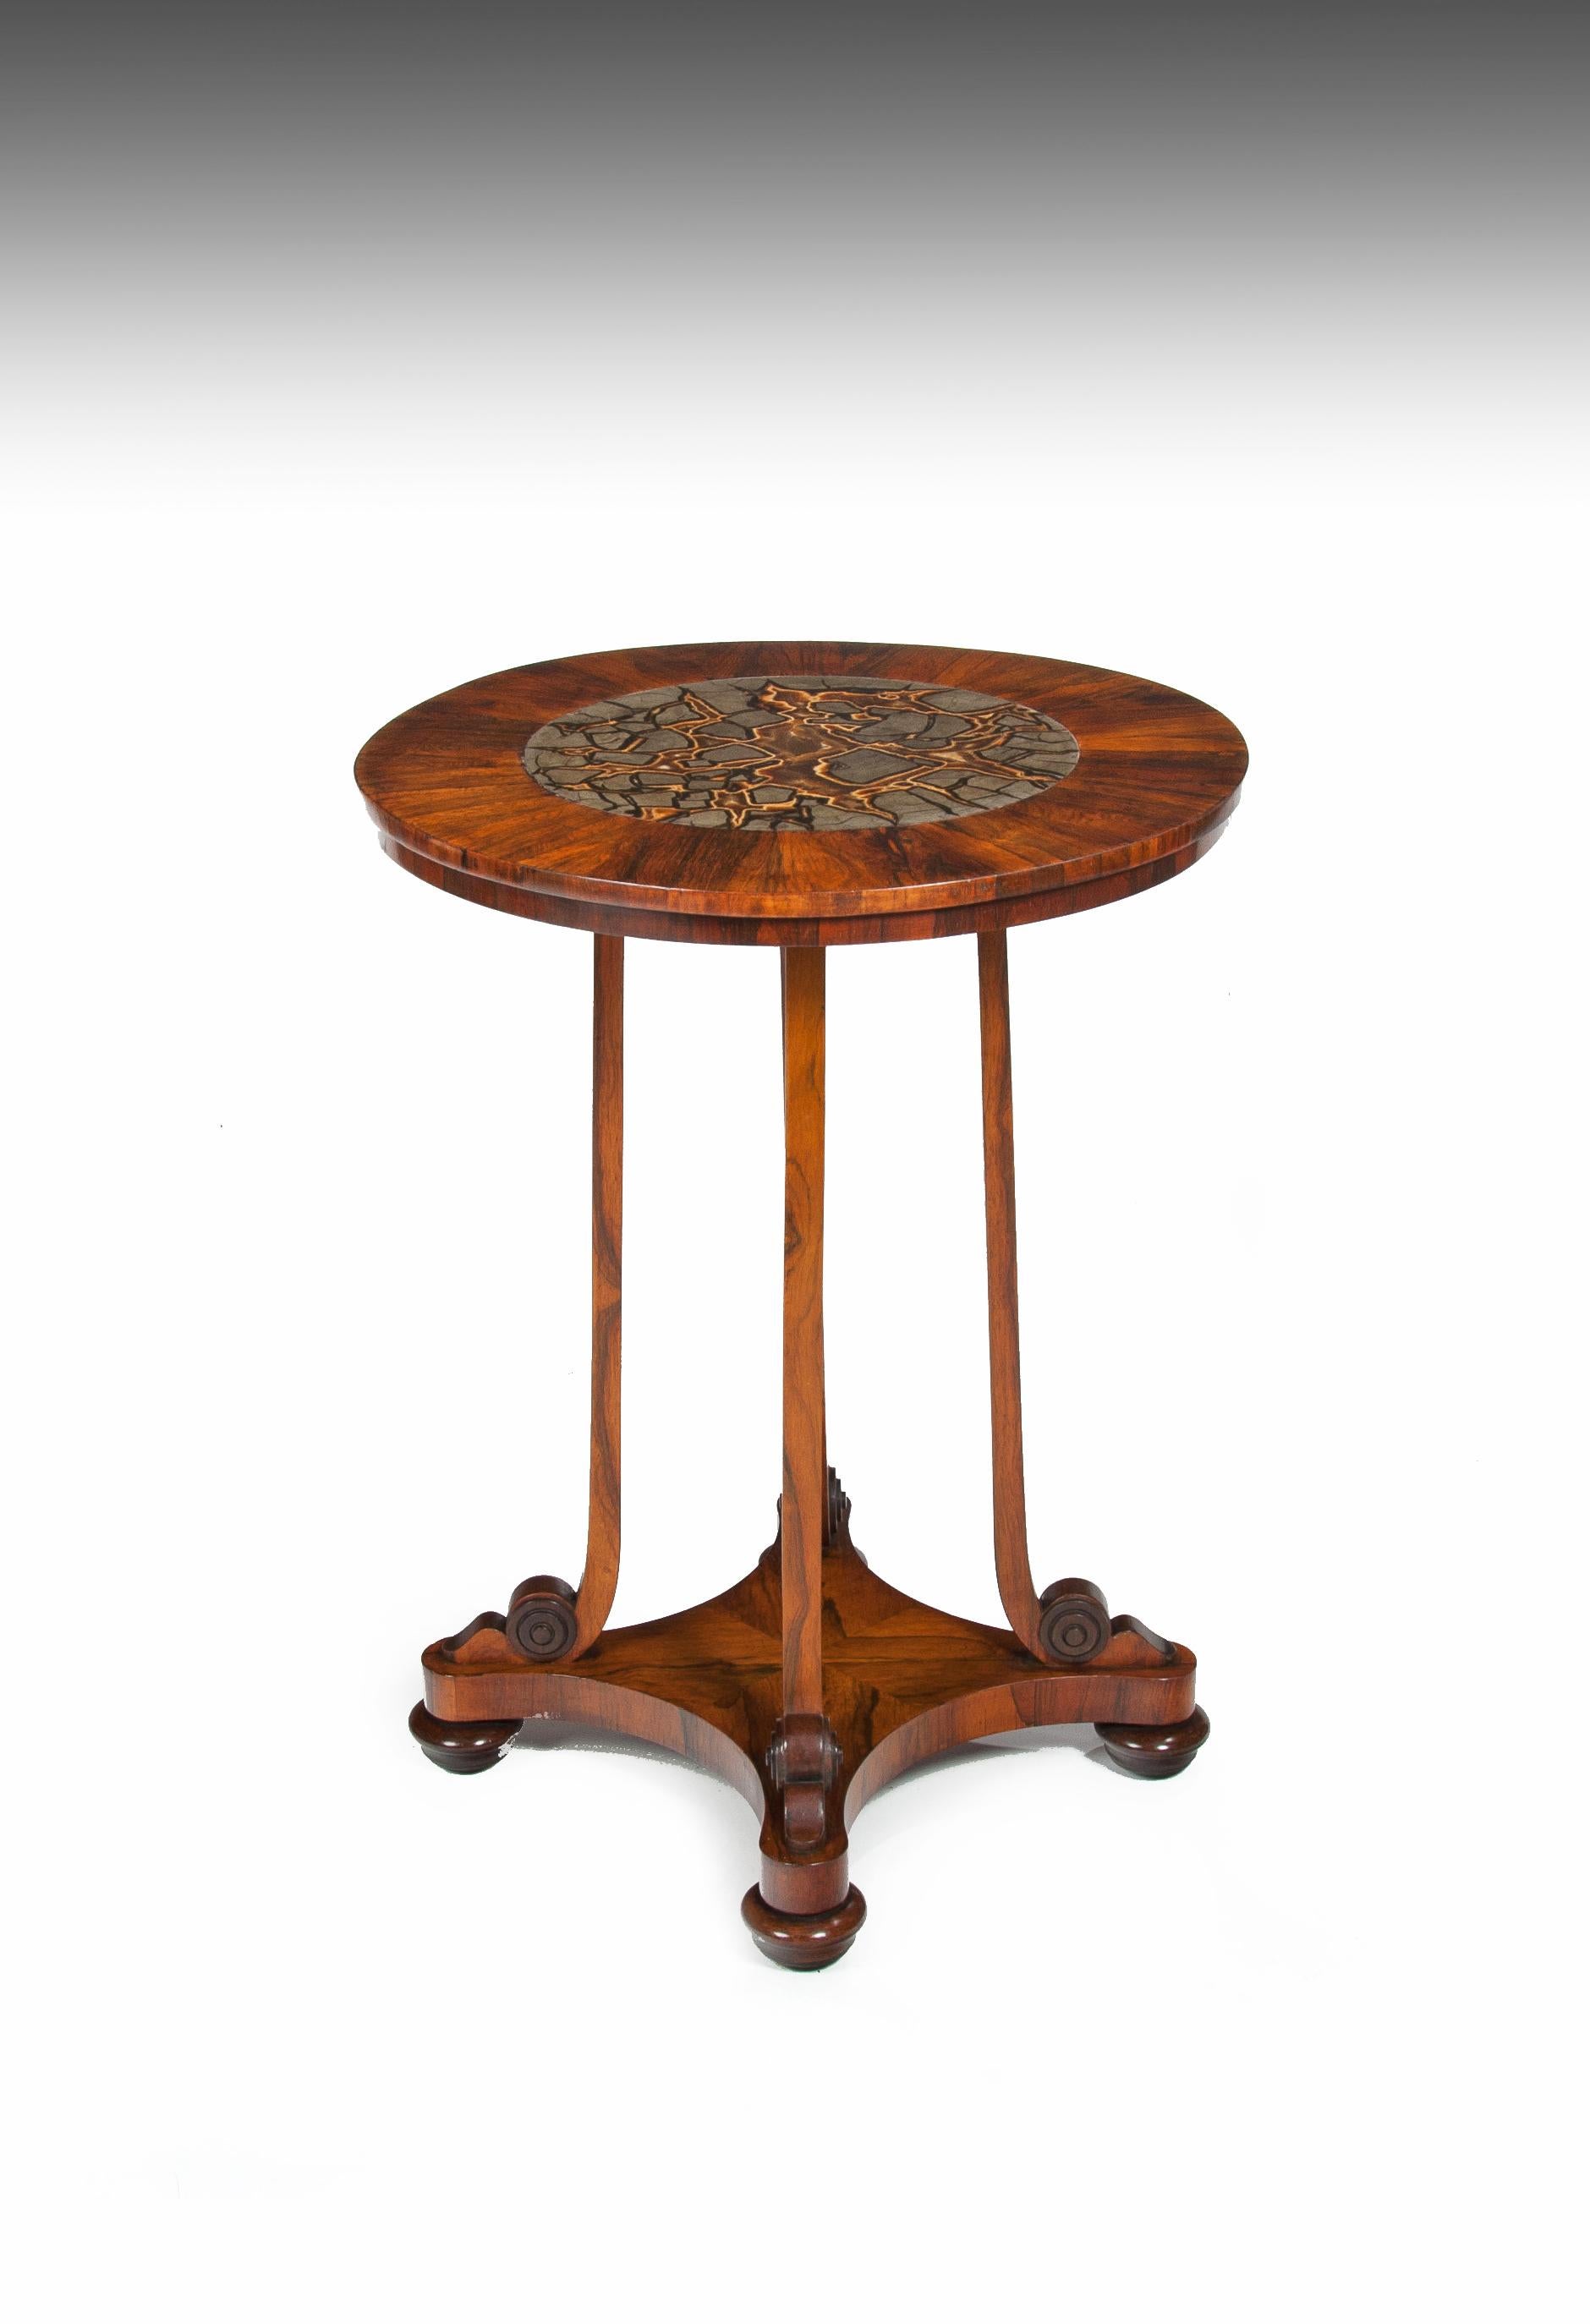 A delightful and rare 19th century William IV period Septarian Nodule / turtle stone English marble circular specimen table. 

English, circa 1835.

The circular top having a rosewood veneered border inset with a large turtle stone marble